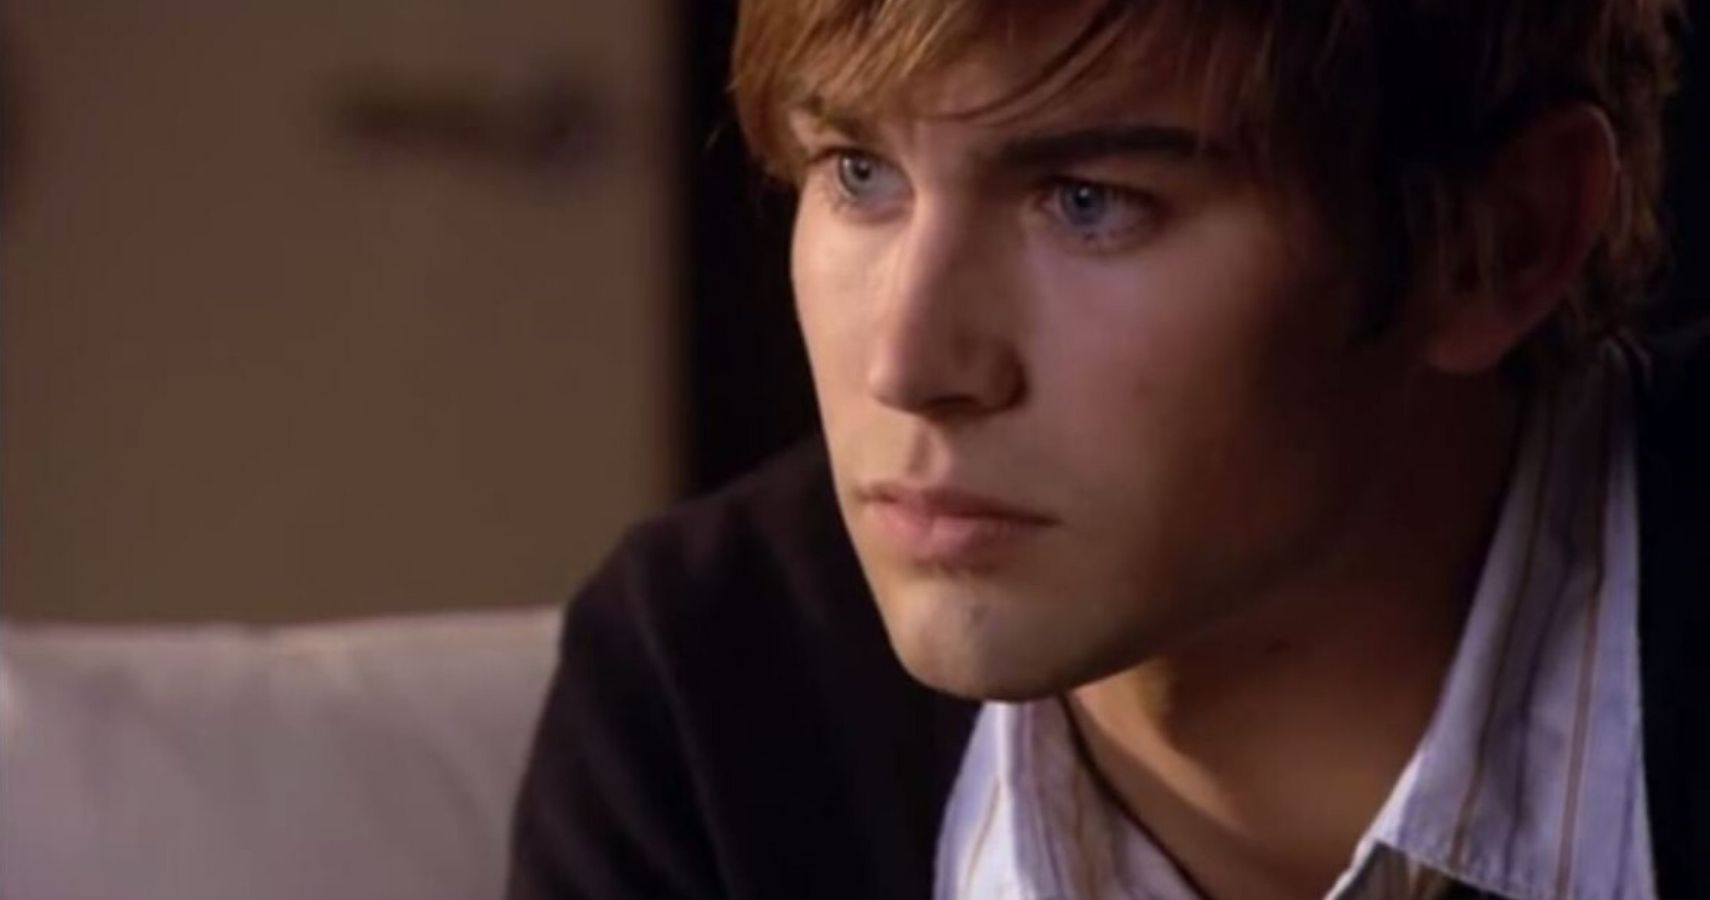 Gossip Girl: 5 Ways Nate Changed (& 5 Ways He'll Always Be The Same)